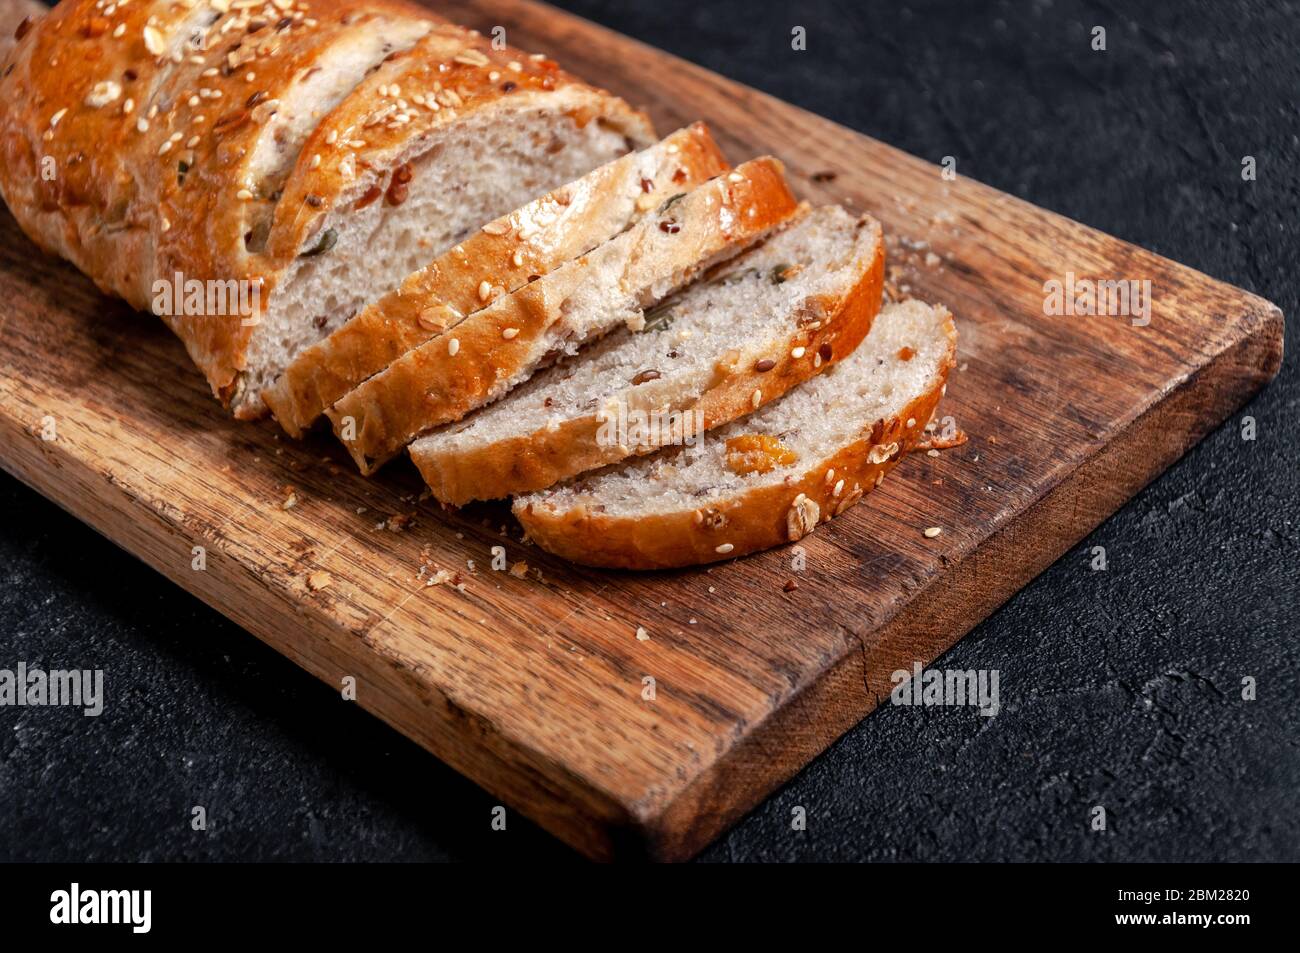 Homemade Sliced Wholemeal Multigrain Bread with Flax Seeds and Sesame on Wooden Board on Dark Table Stock Photo